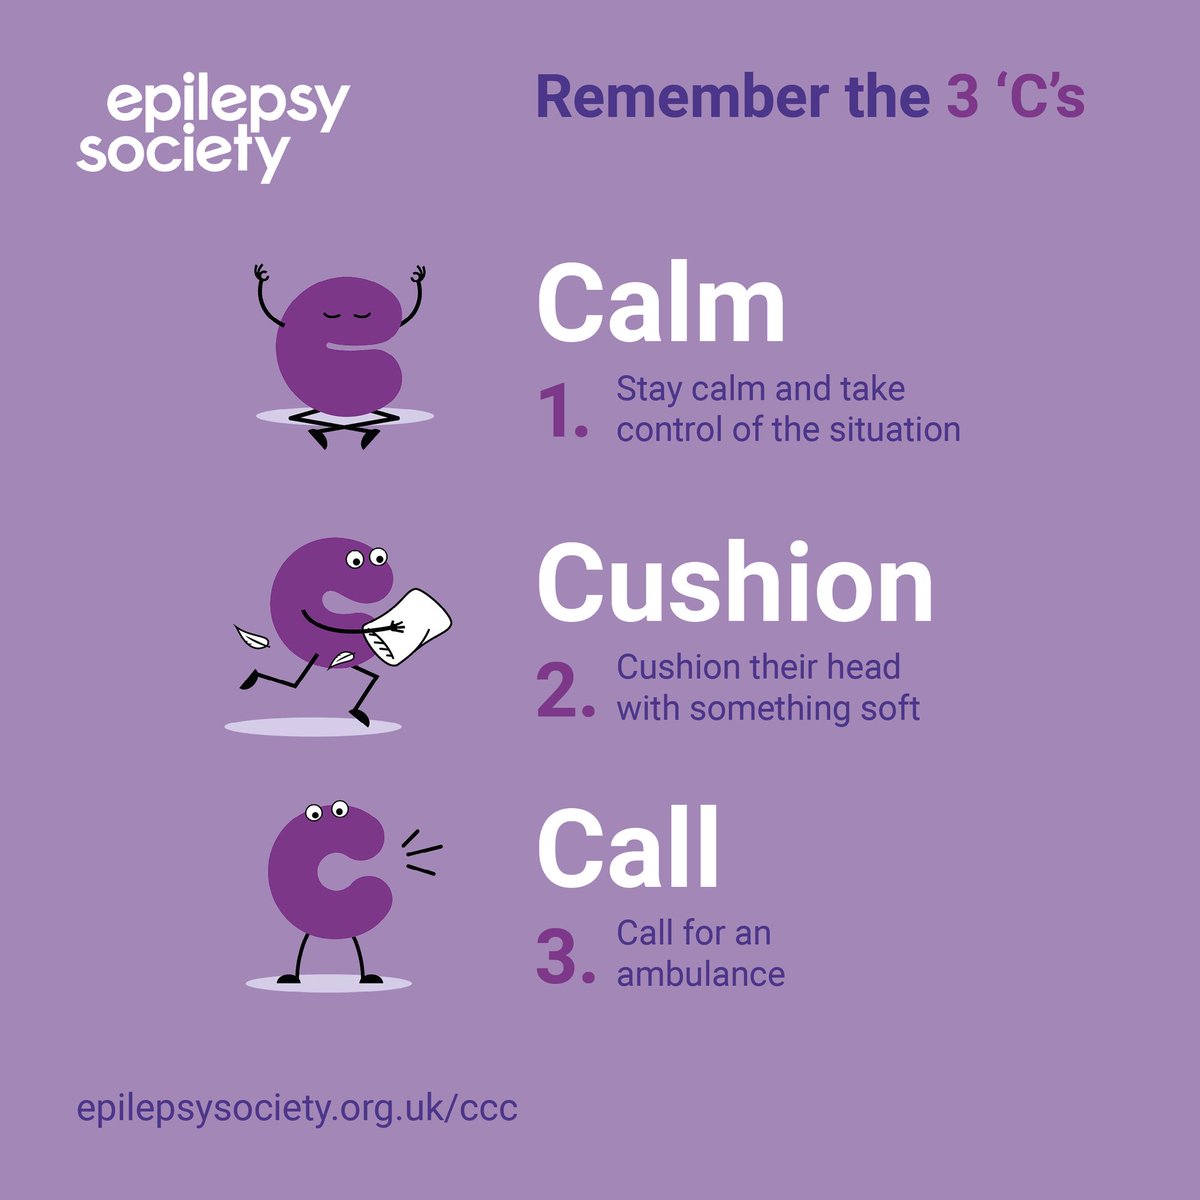 If you see someone having a seizure, remember the 3 'C's: Stay CALM CUSHION their head CALL for help Our aim is to make sure everyone is #seizuresavvy and knows how to support someone with #epilepsy 💜